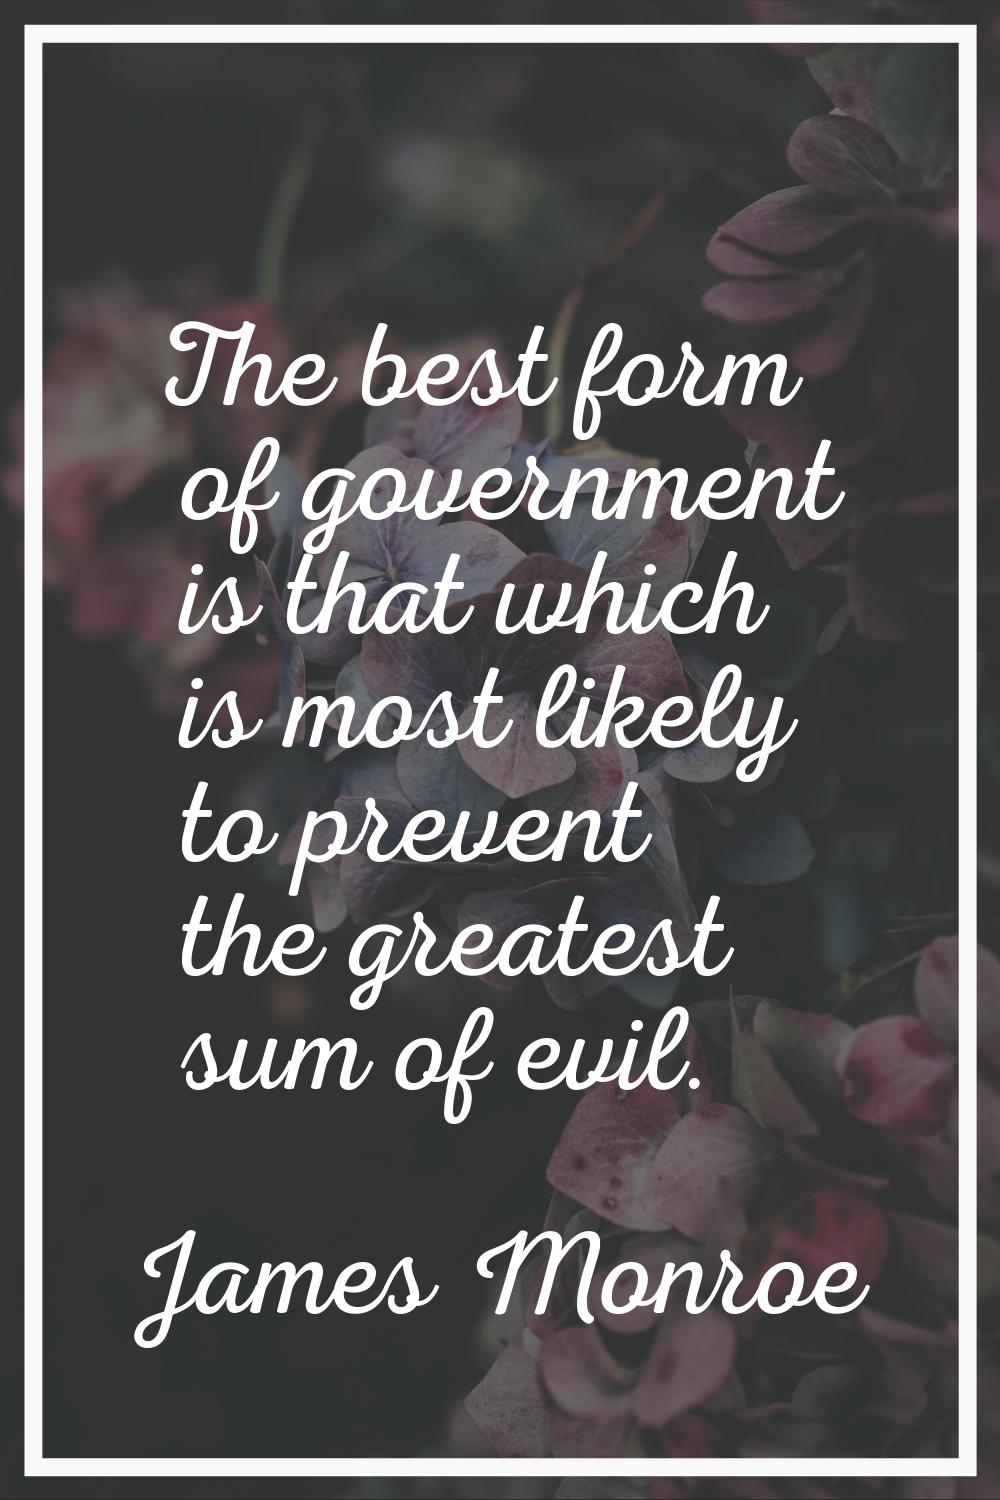 The best form of government is that which is most likely to prevent the greatest sum of evil.